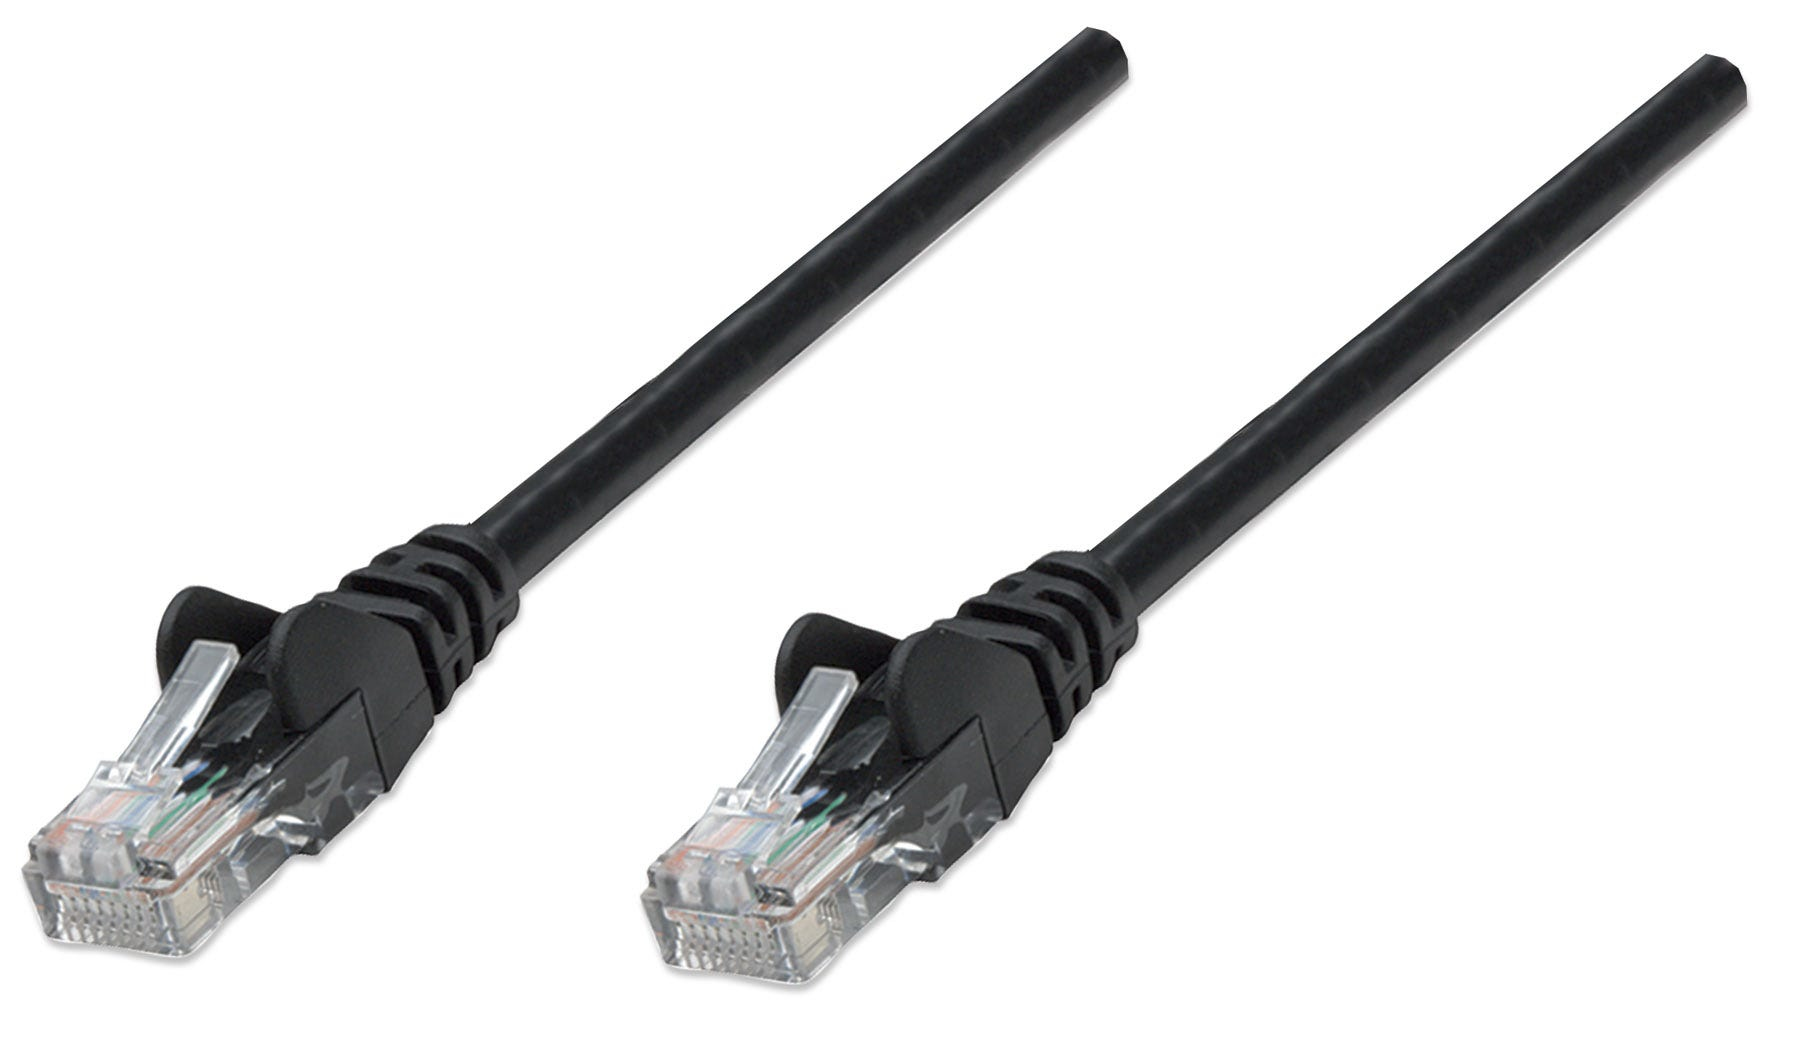 Cable Patch Intellinet 3.0 Mts (10.0F) Cat-5E Utp Negro 320764